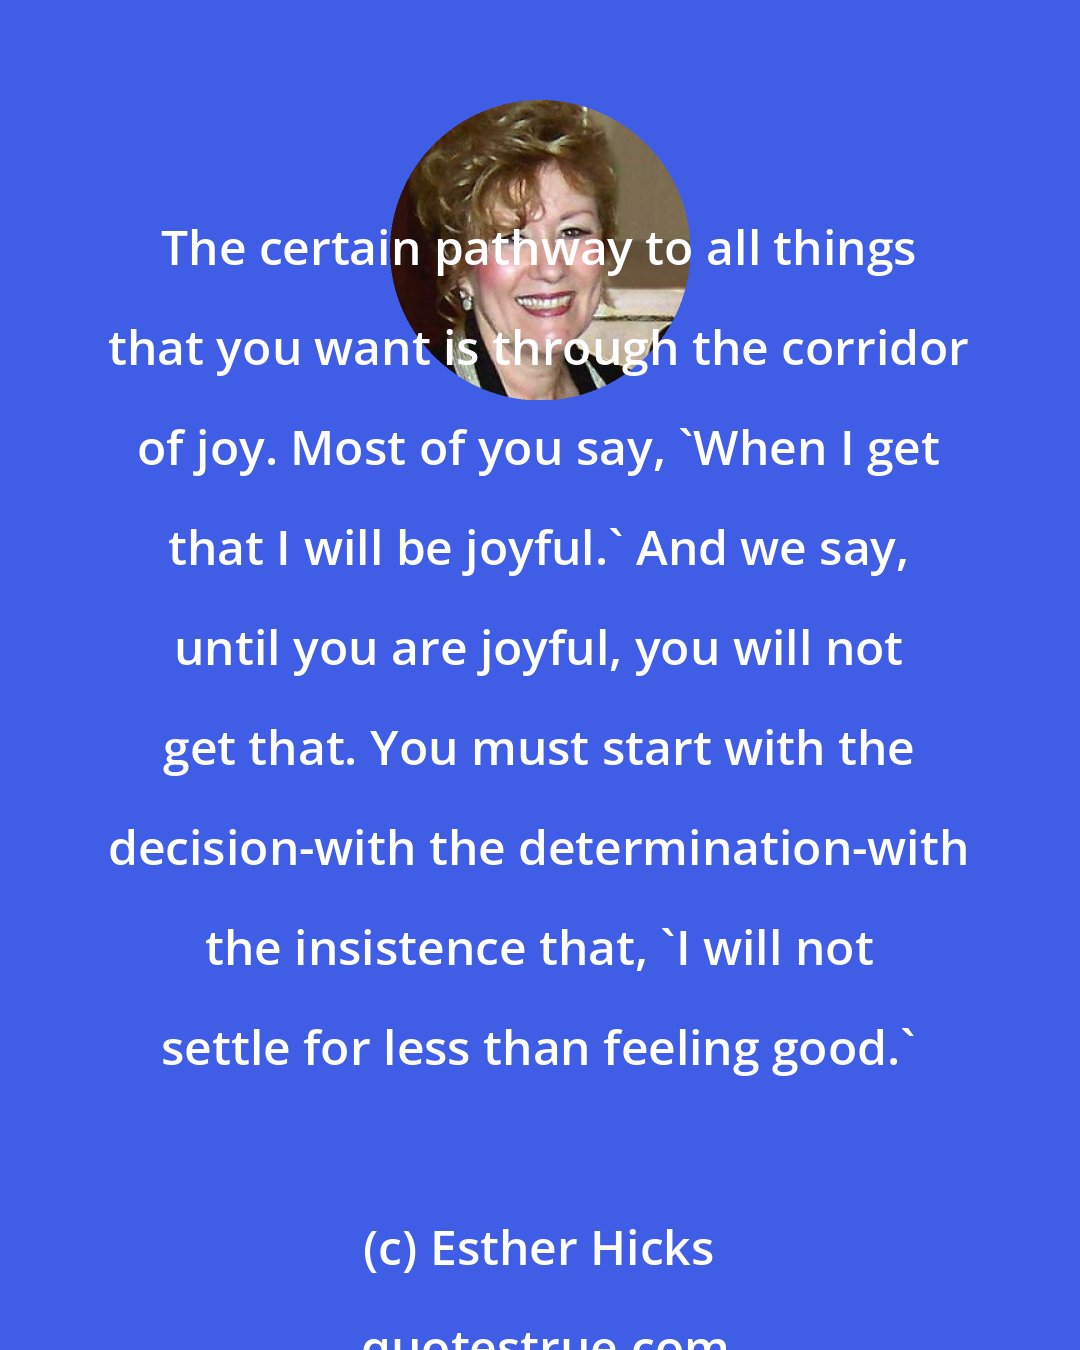 Esther Hicks: The certain pathway to all things that you want is through the corridor of joy. Most of you say, 'When I get that I will be joyful.' And we say, until you are joyful, you will not get that. You must start with the decision-with the determination-with the insistence that, 'I will not settle for less than feeling good.'